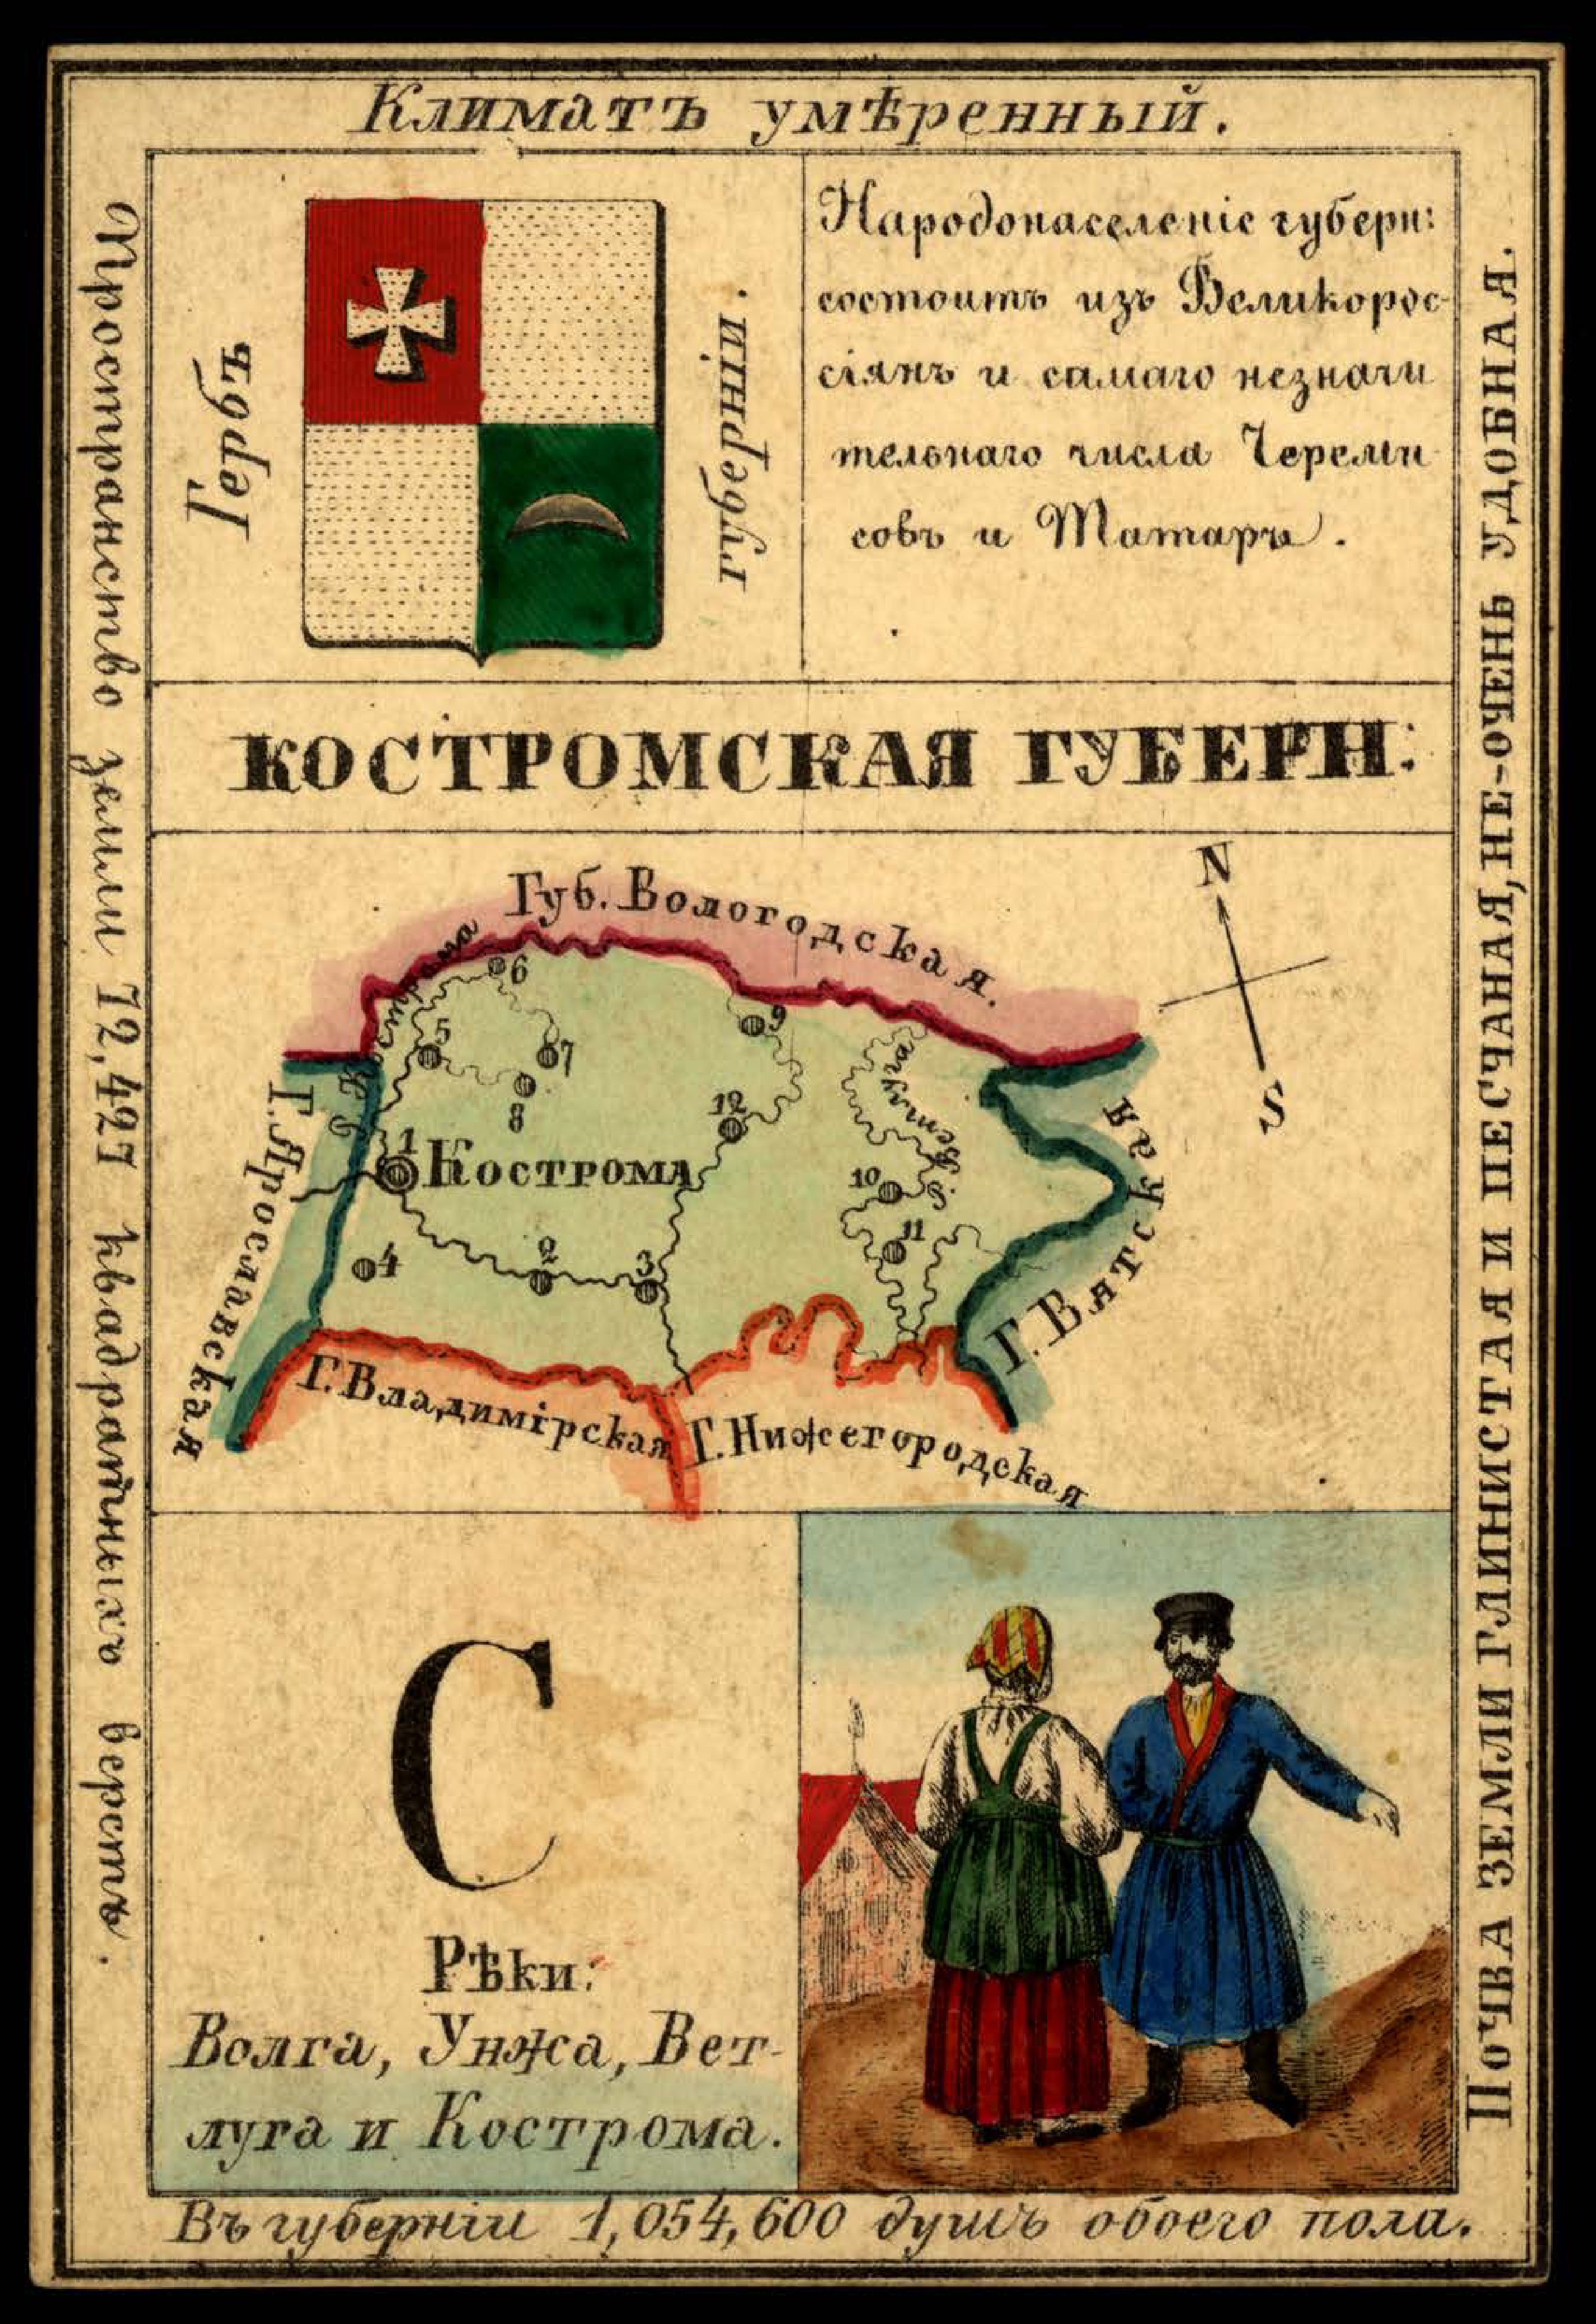 1856. Card from set of geographical cards of the Russian Empire 066